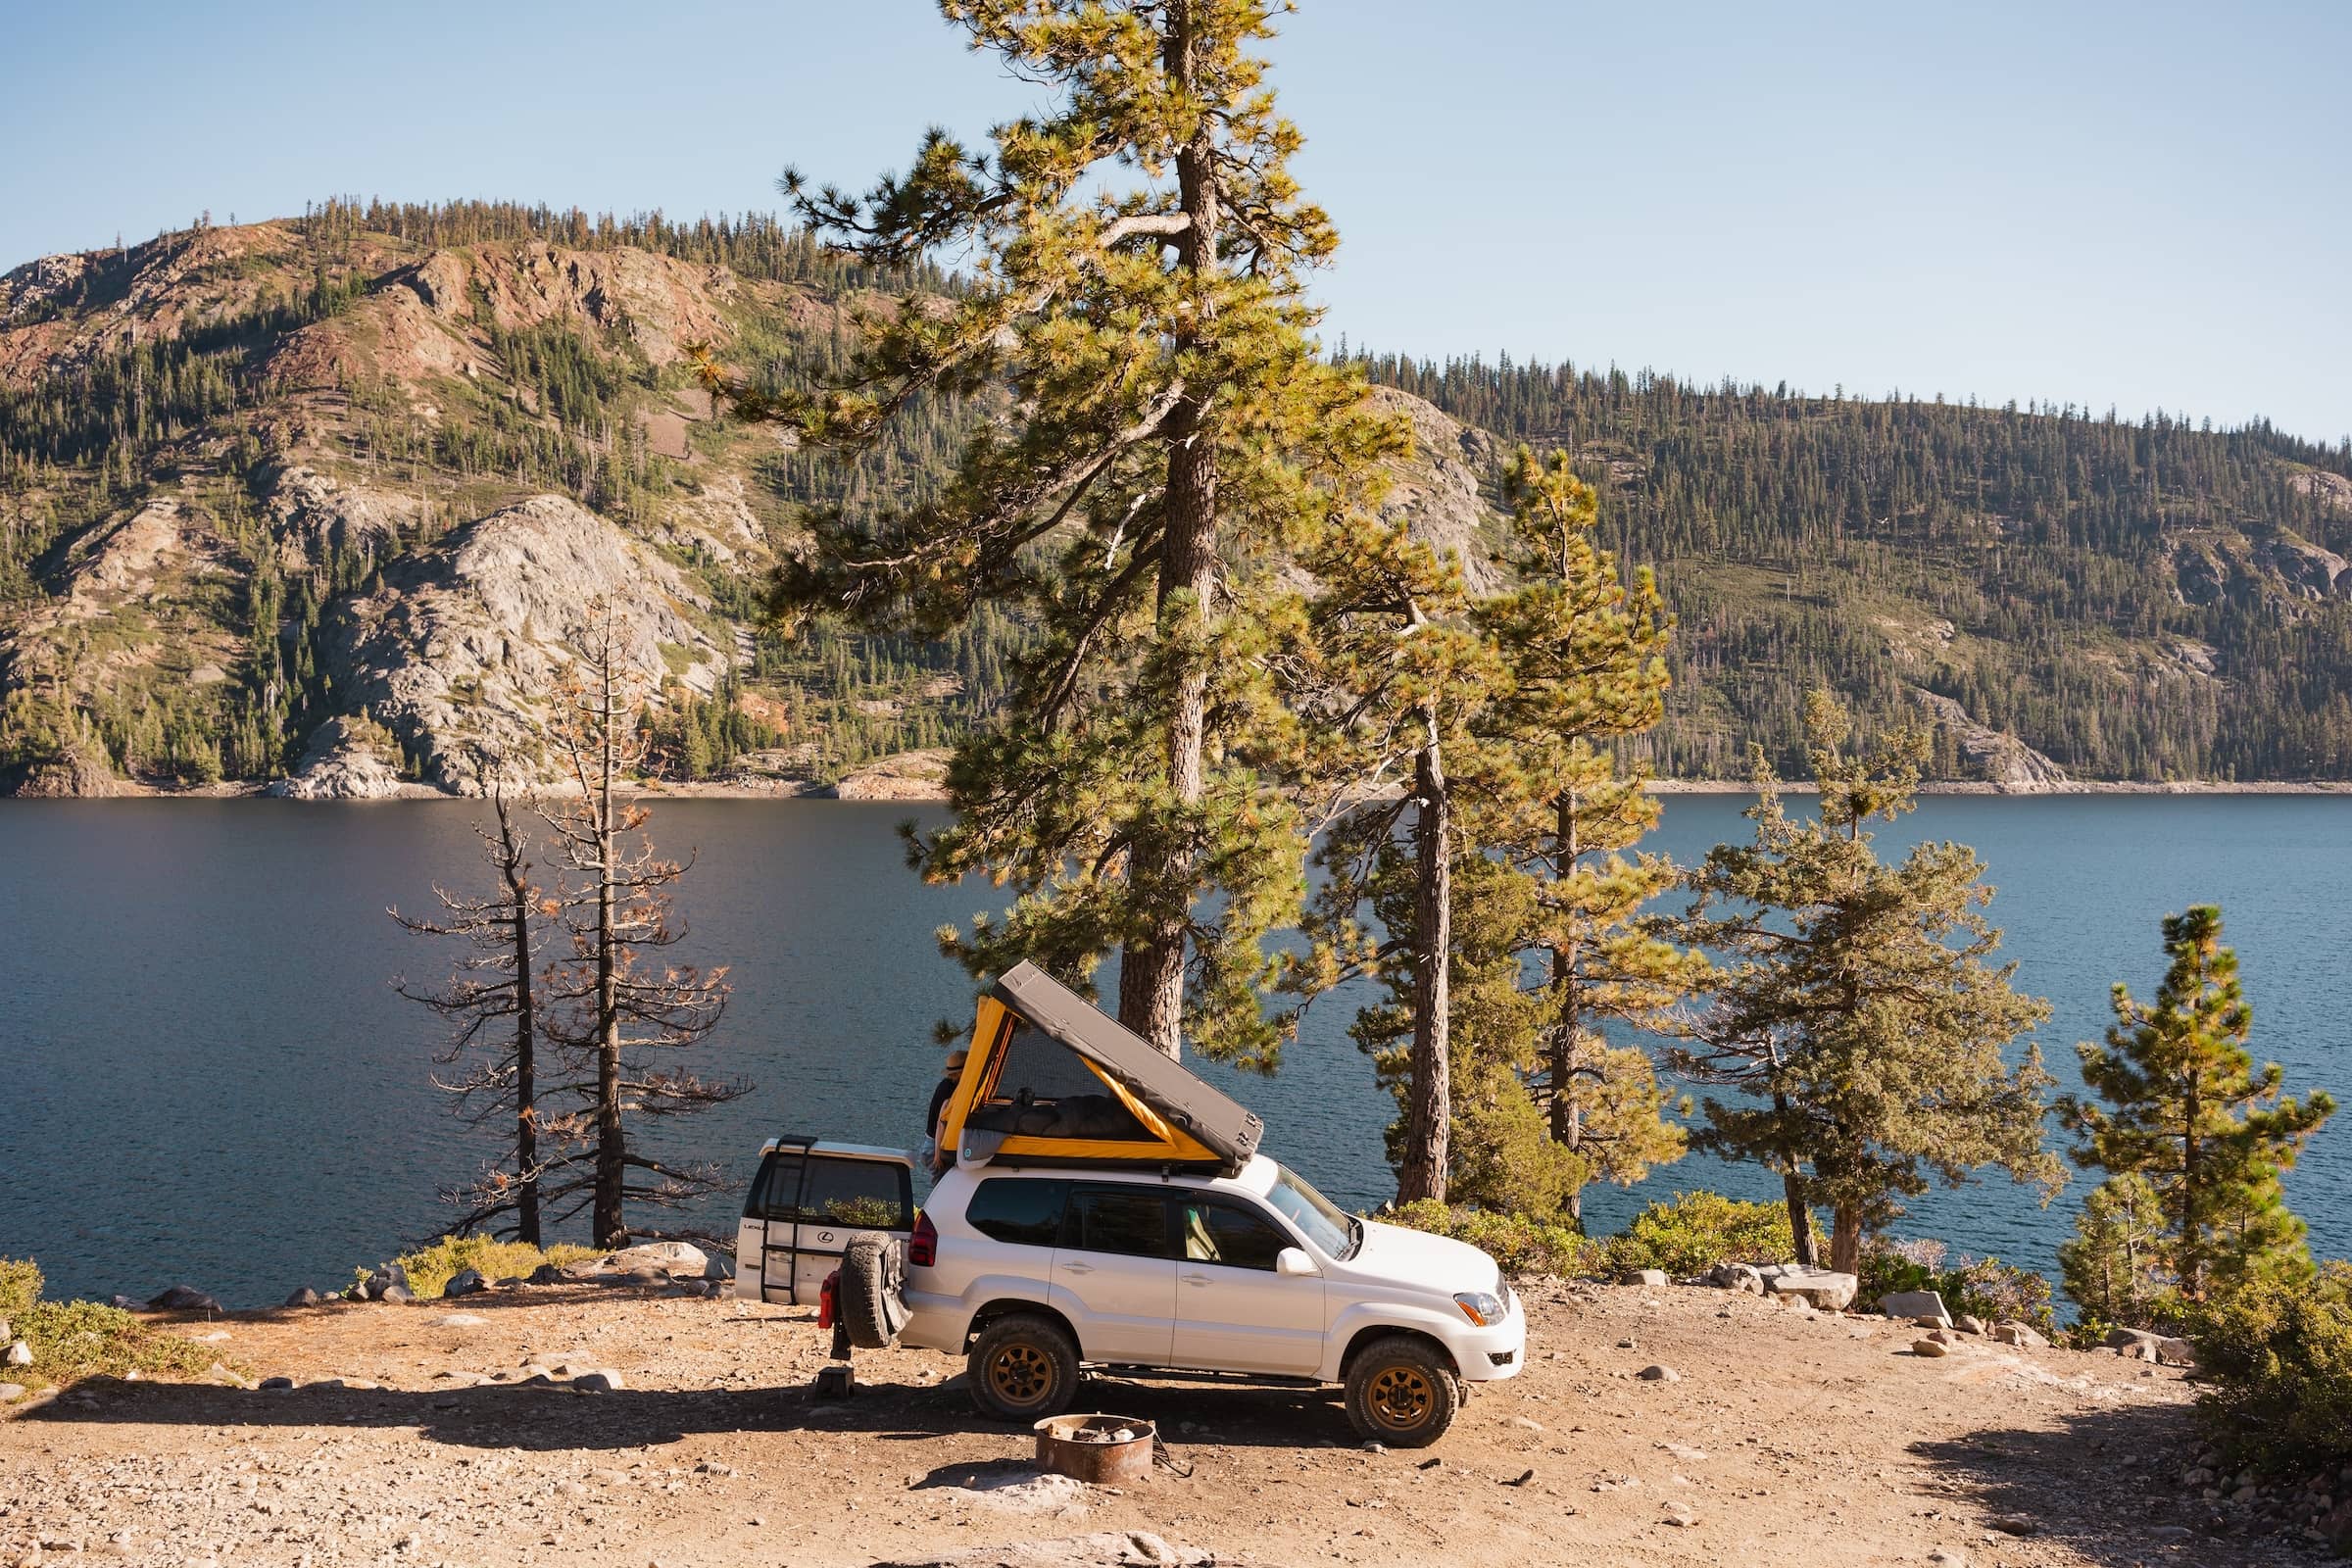 A white SUV with a rooftop tent open on top is seen in profile next to a fire ring, with a lake behind it, and mountains in the distance of the other shore.